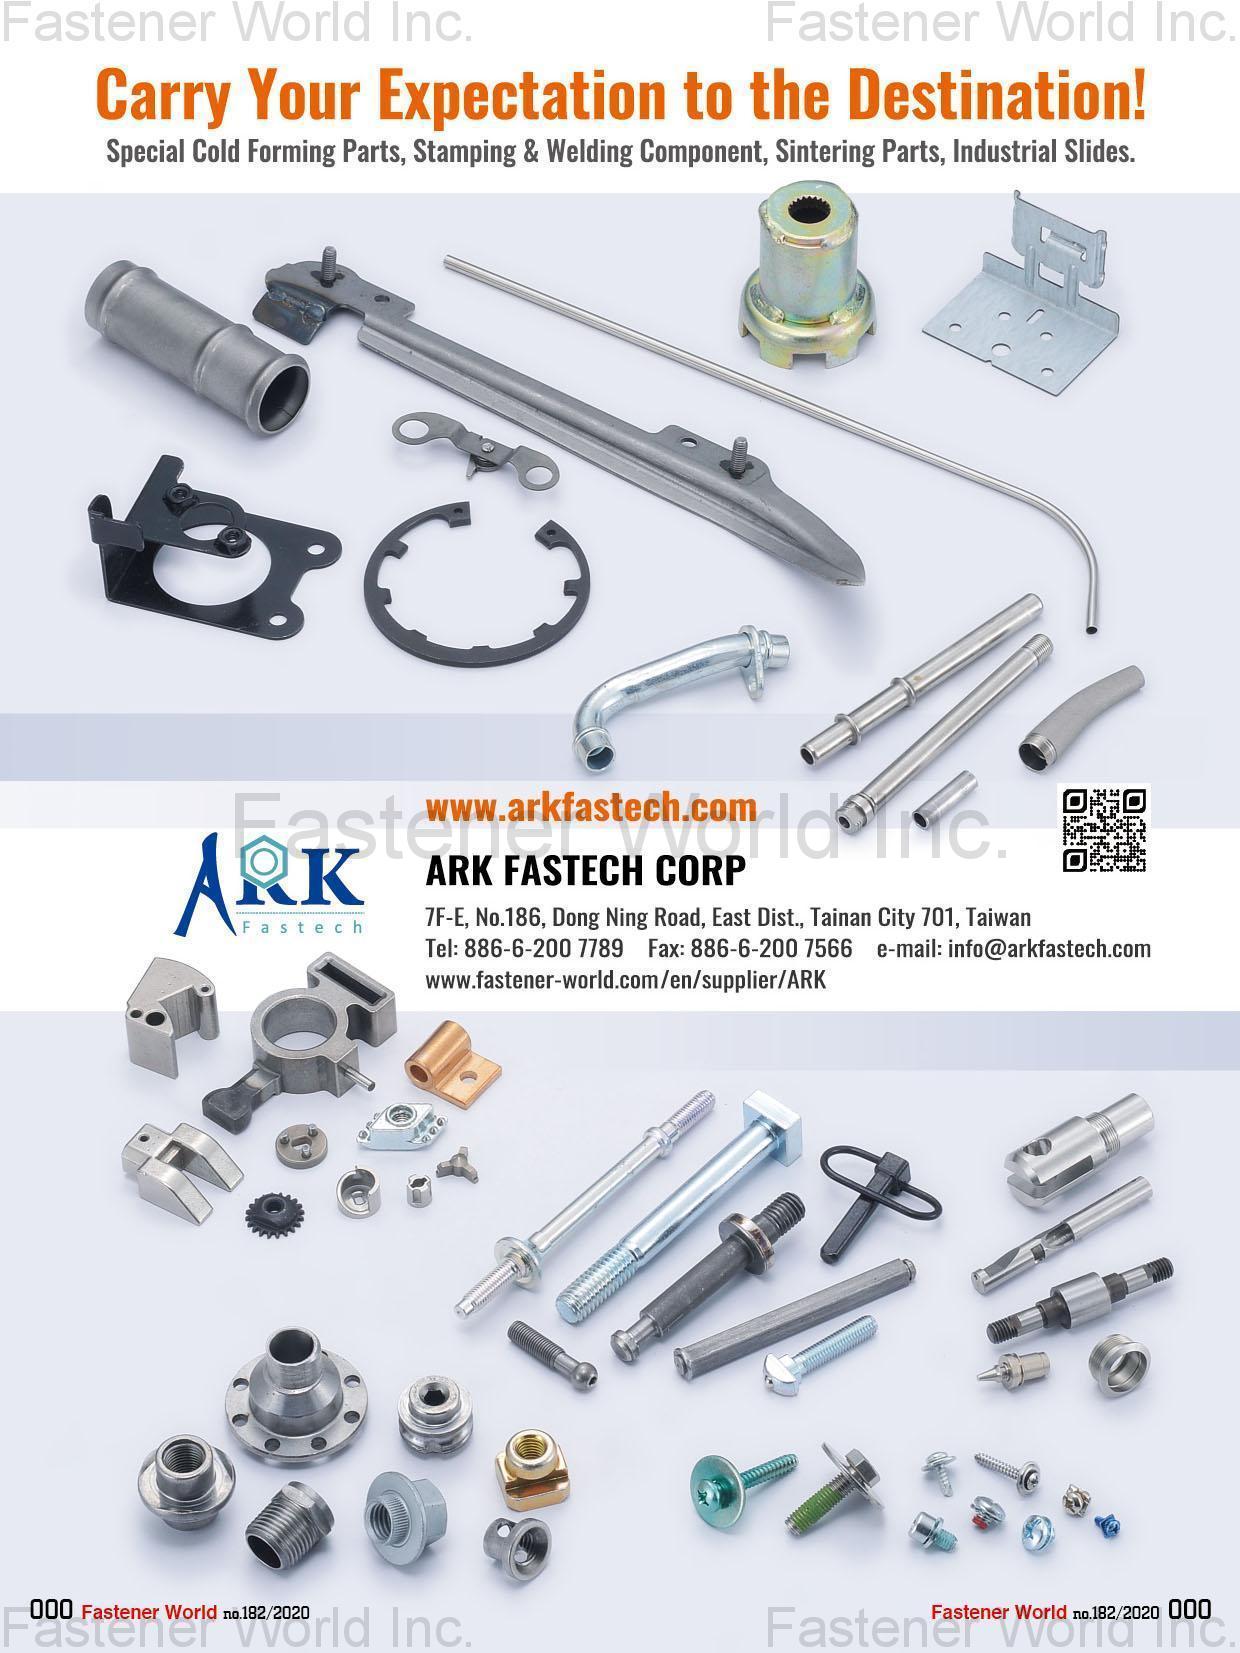 ARK FASTECH CORP , Special Cold Forming Parts, Stamping & Welding Component, Sintering Parts, Industrial Slides , Micro Forming Parts